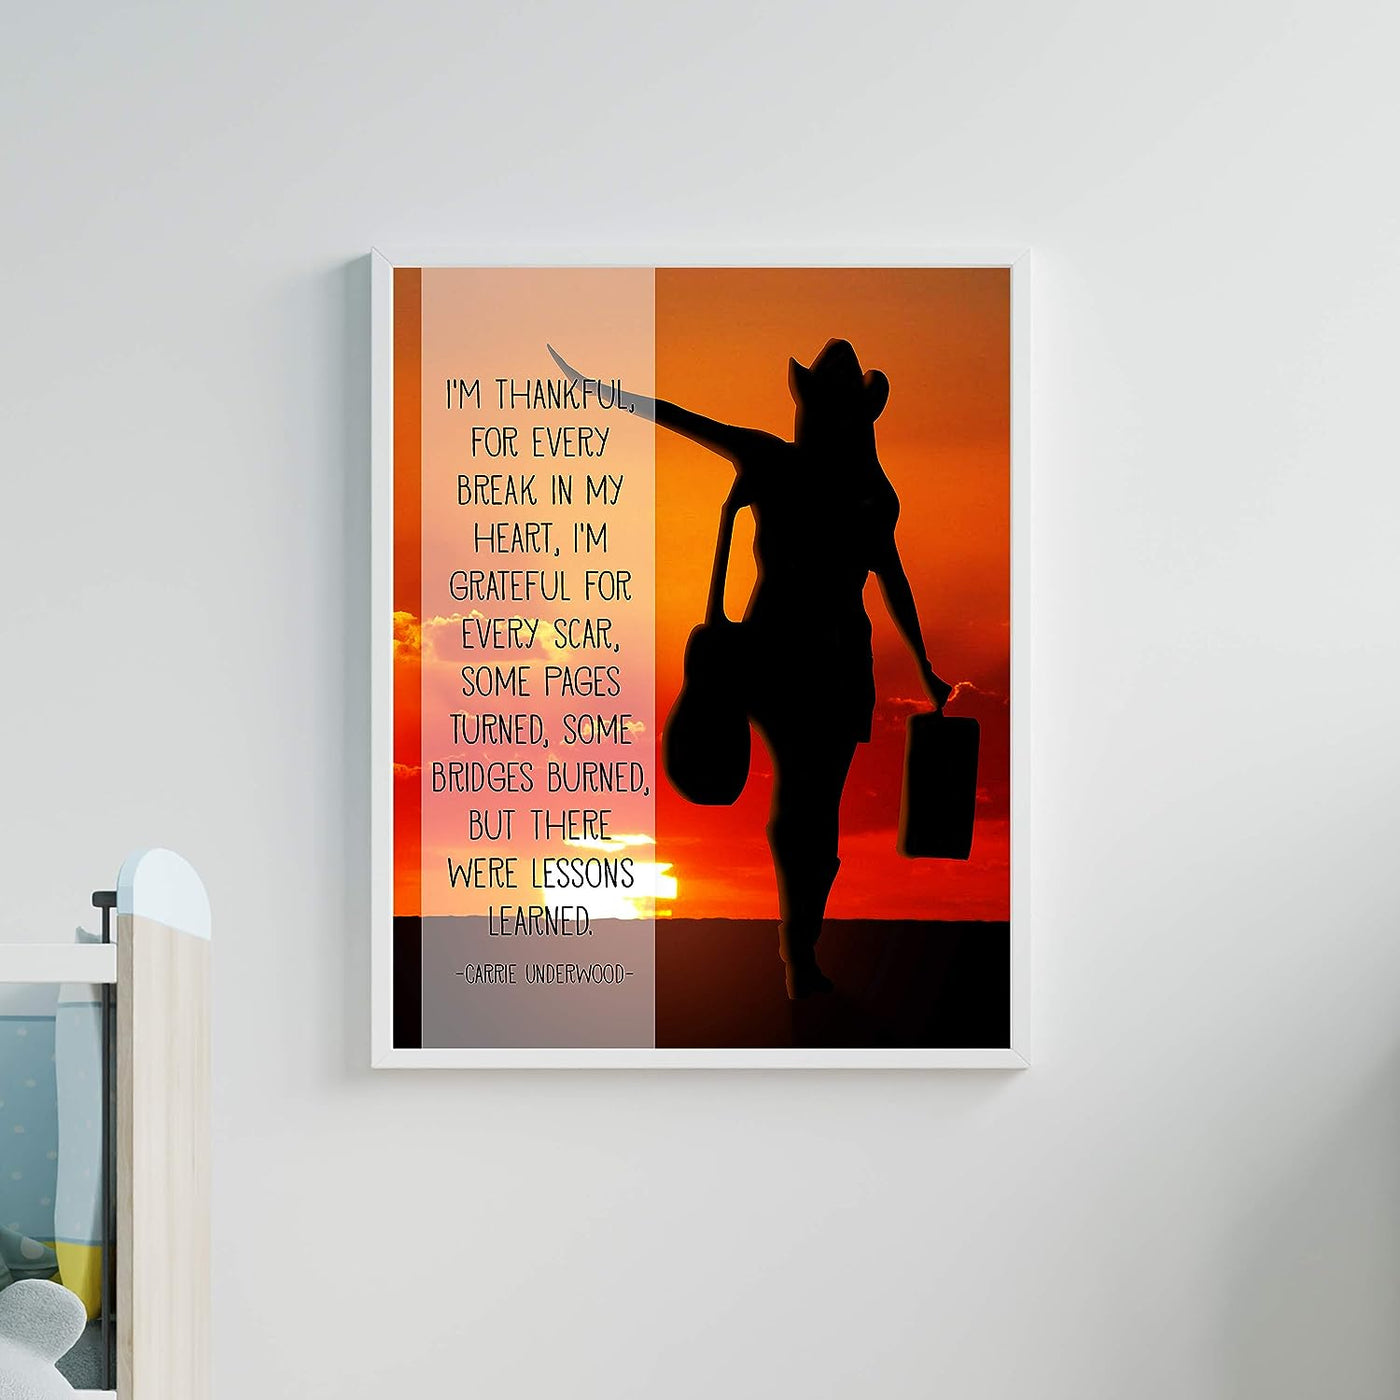 I'm Thankful for Every Break in My Heart-Inspirational Quotes Wall Art-11 x 14" Motivational Sunset Poster Print-Ready to Frame. Home-Office-Studio-Dorm Decor. Great Gift for Country Music Fans!